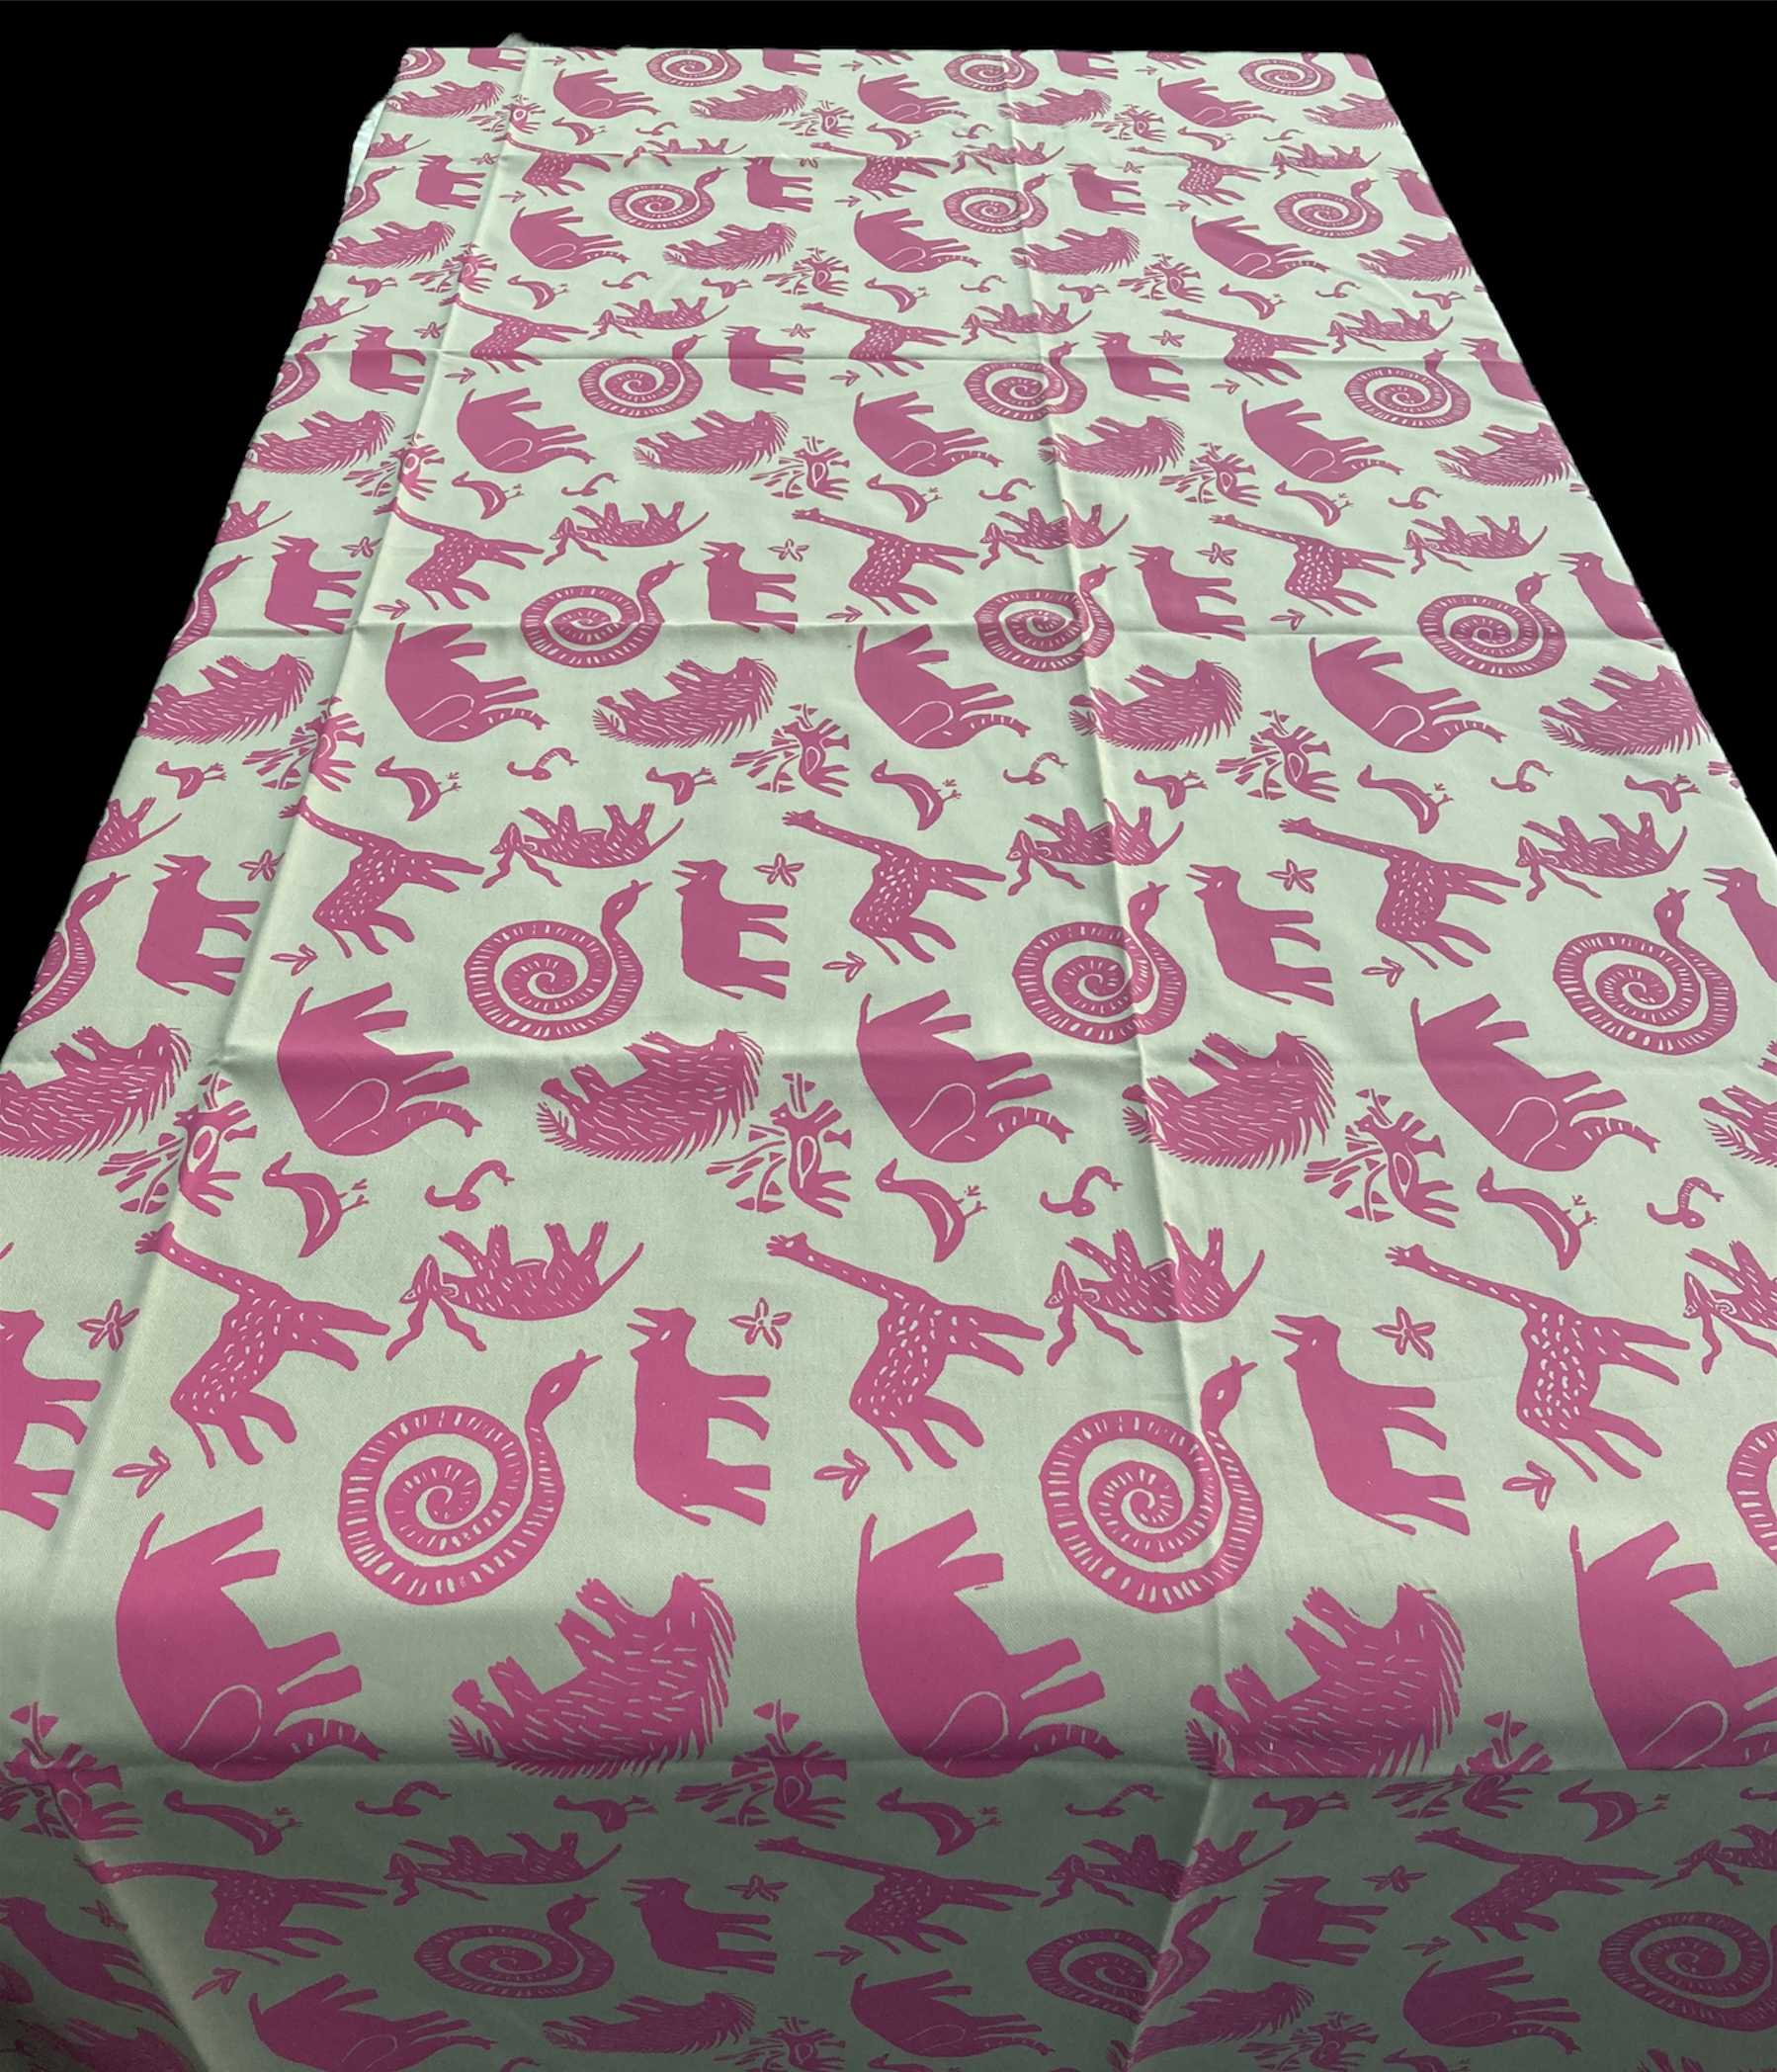 100% cotton Tablecloth approx. 59" x 57" from Namibia - # p06t